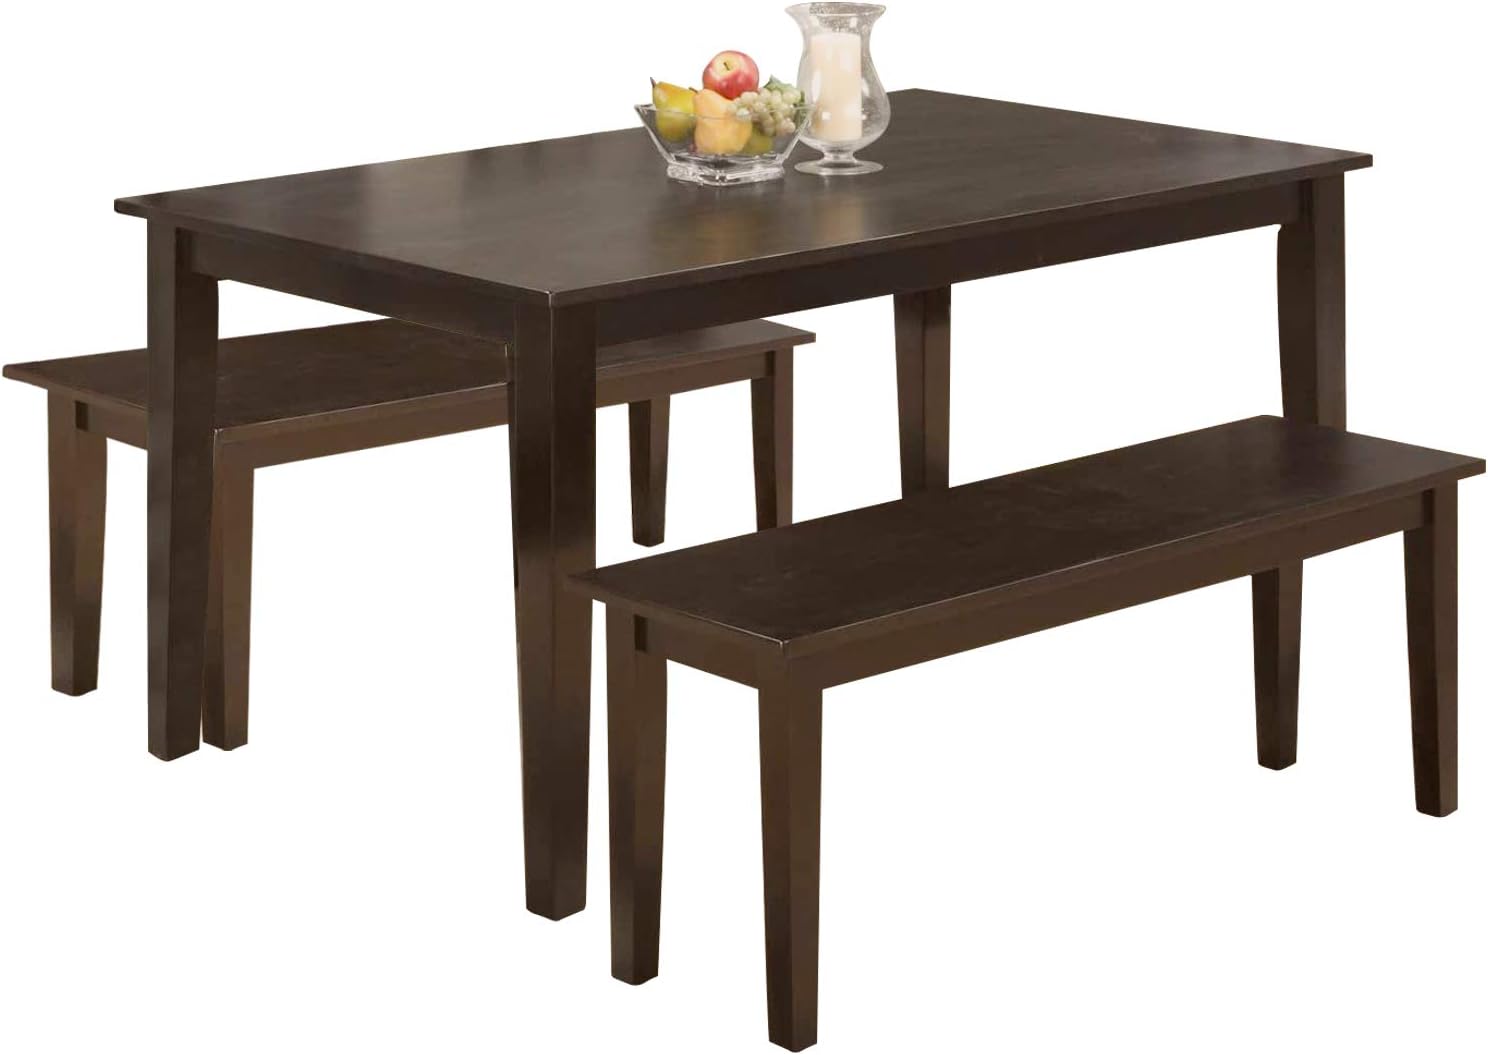 Modern 45 Inch Dining Table Set Solid Wood Kitchen Table with Two Benchs Dining Room Table Set for Small Spaces Table Home Furniture Rectangular